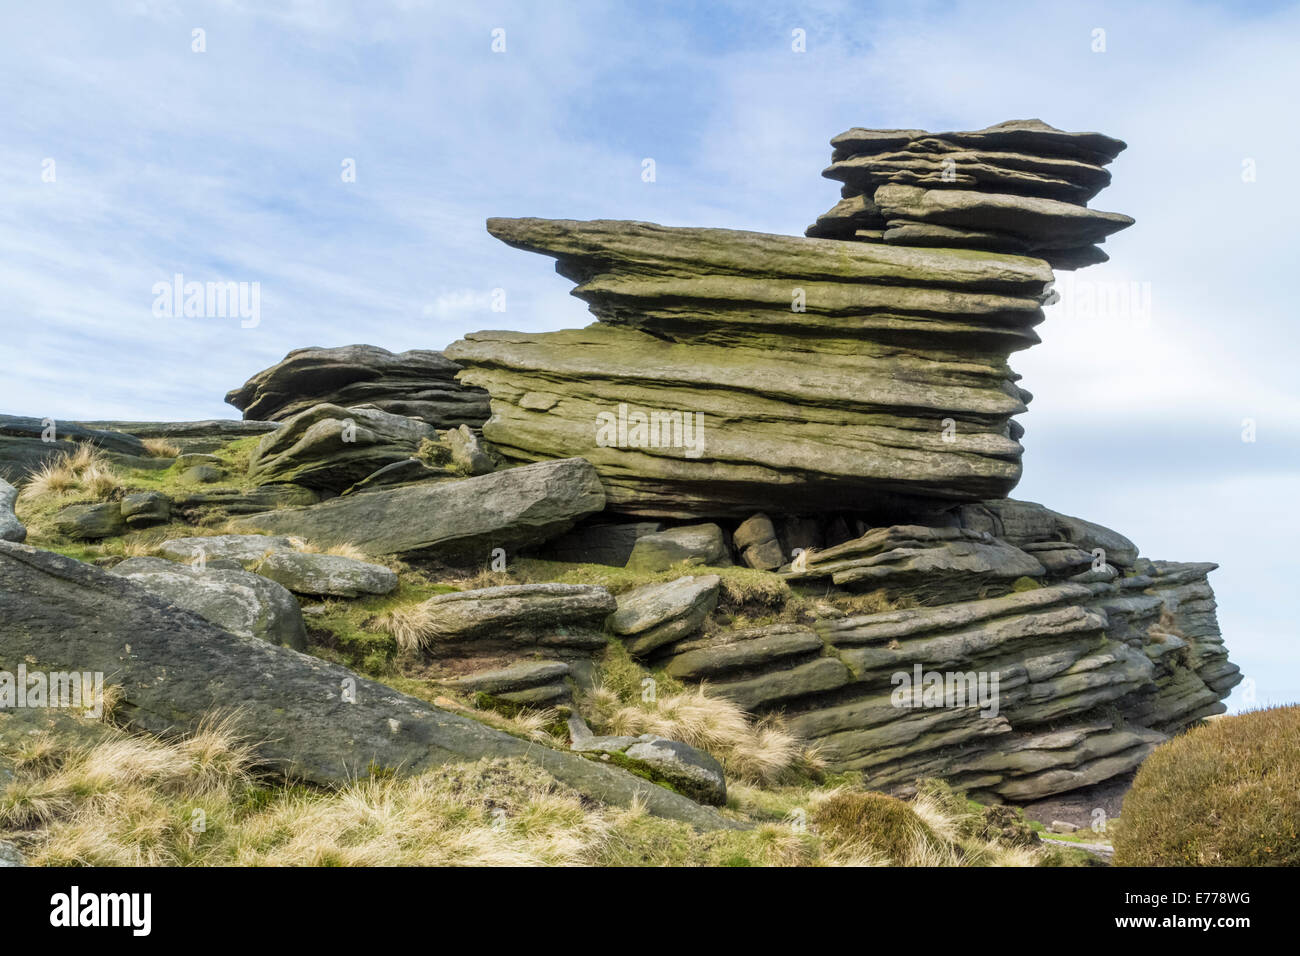 Layers of gritstone rock (millstone grit or siliceous sandstone) on Kinder Scout, Peak District National Park, Derbyshire, England, UK Stock Photo